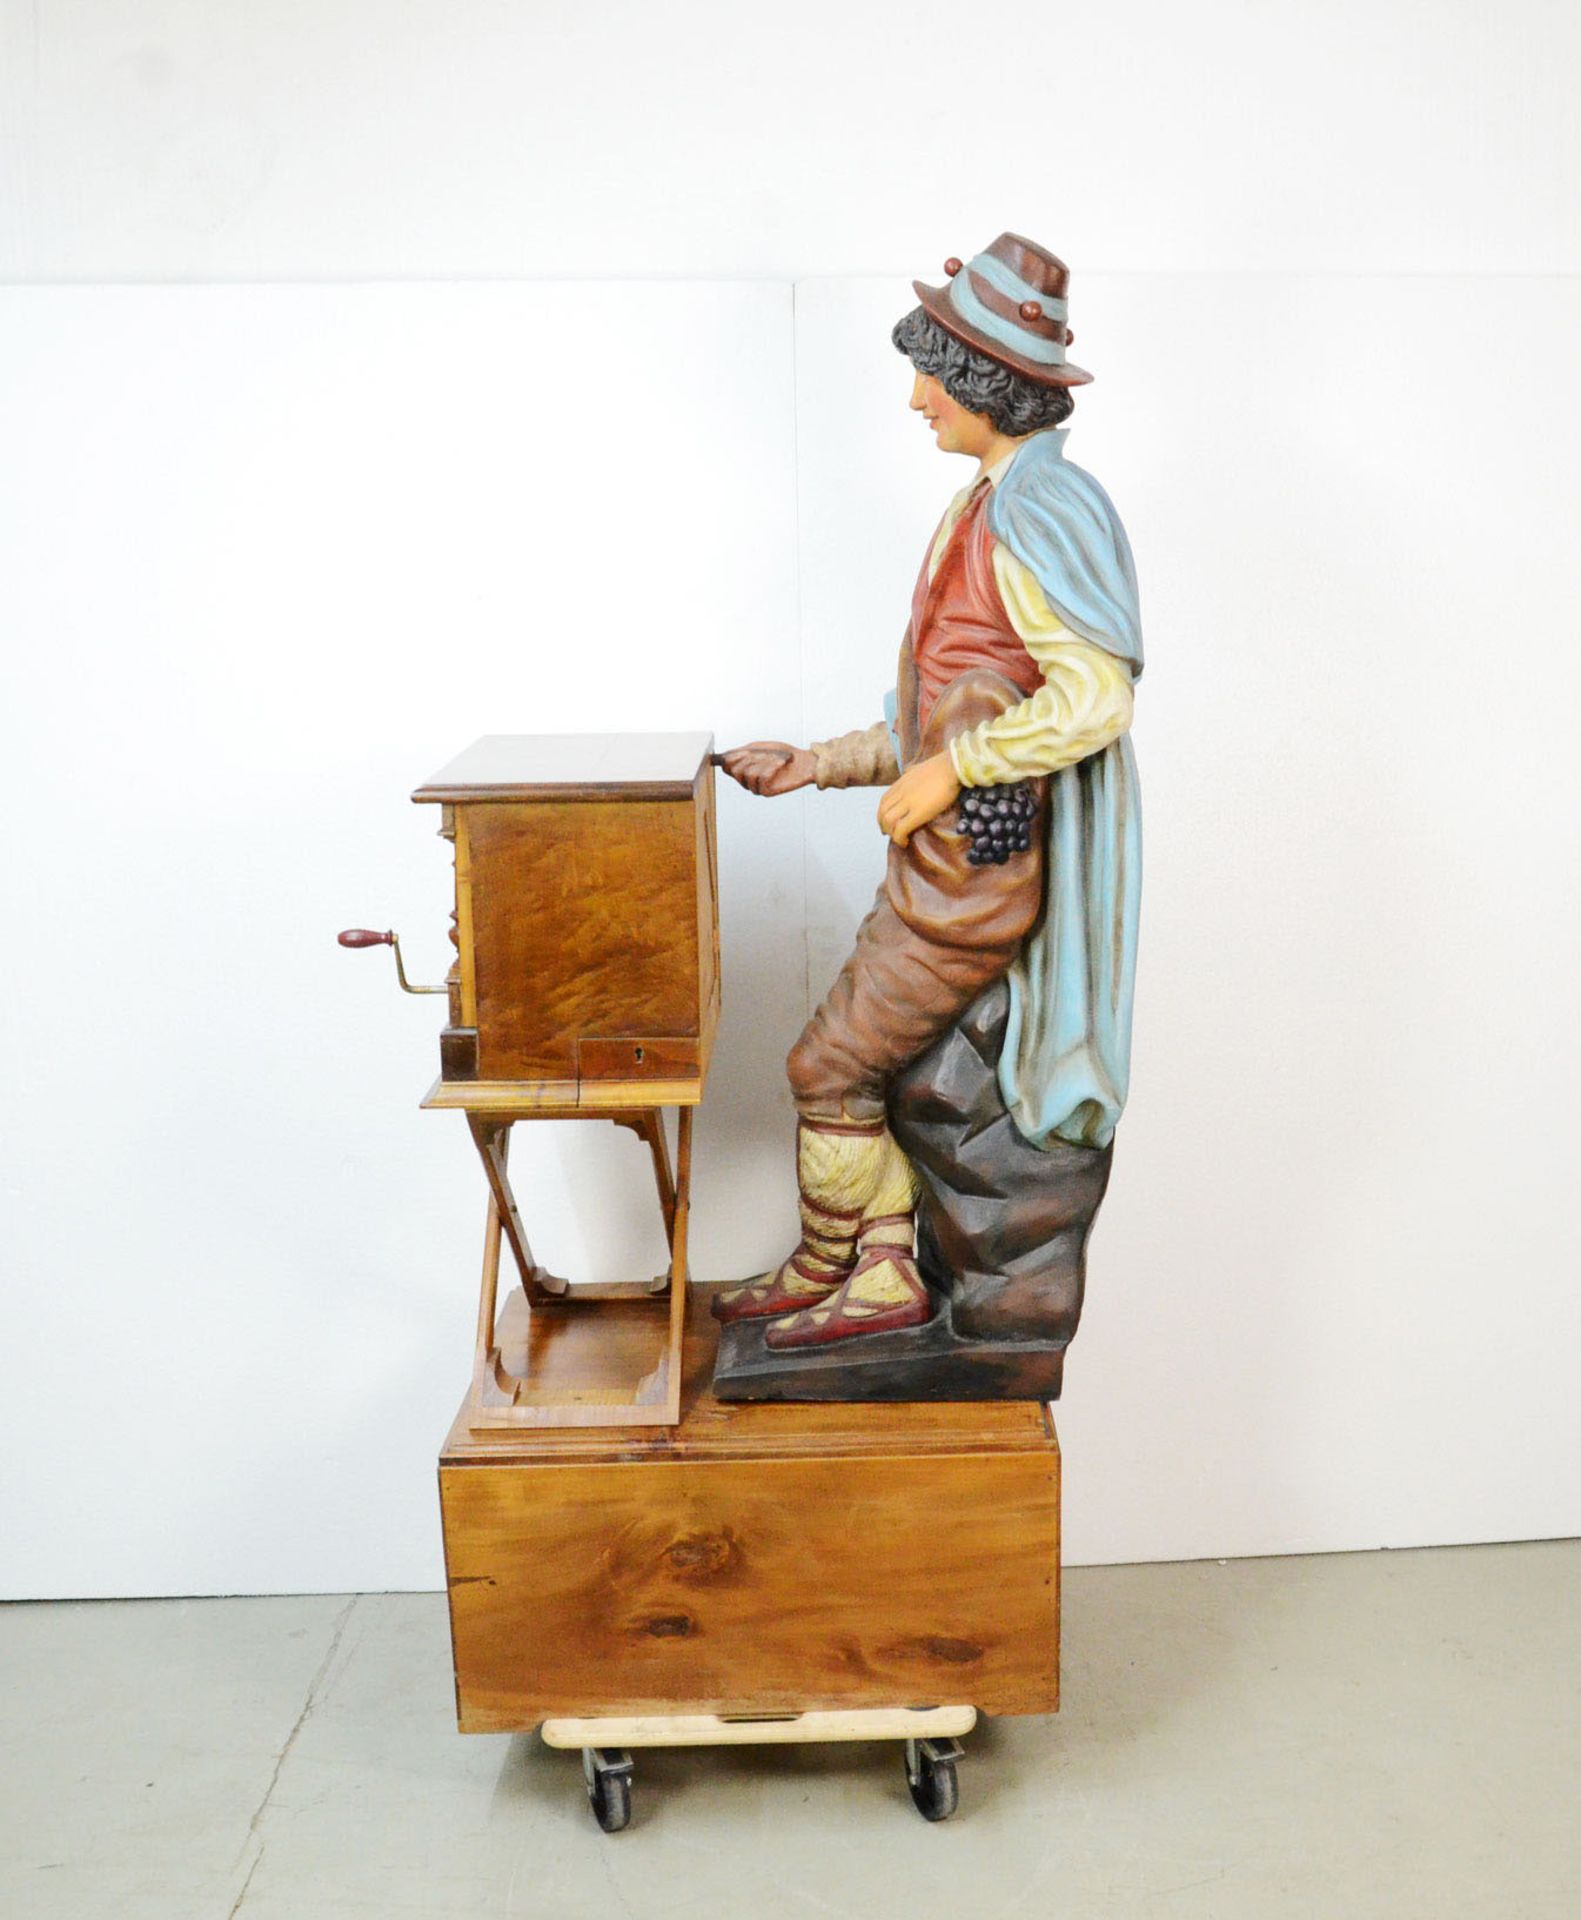 Polyphon Savoyard with a Wooden Figure - Image 5 of 8